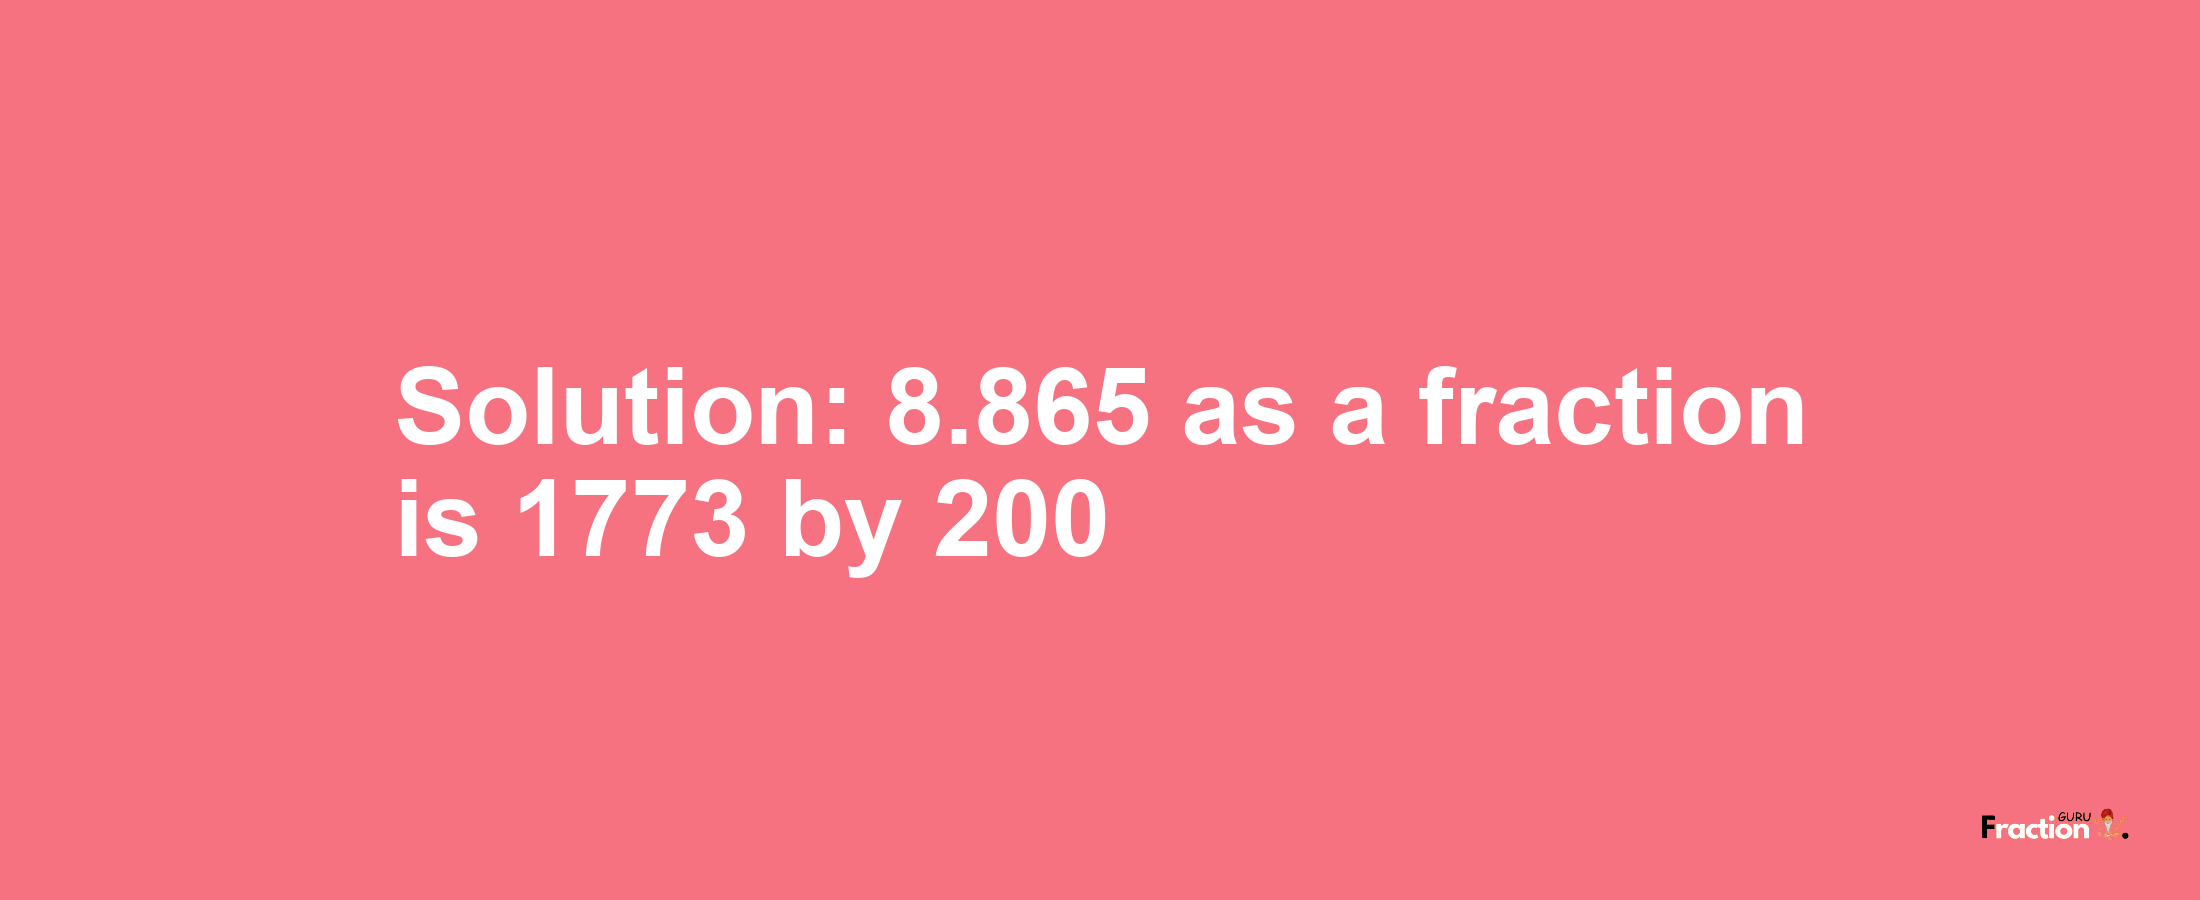 Solution:8.865 as a fraction is 1773/200